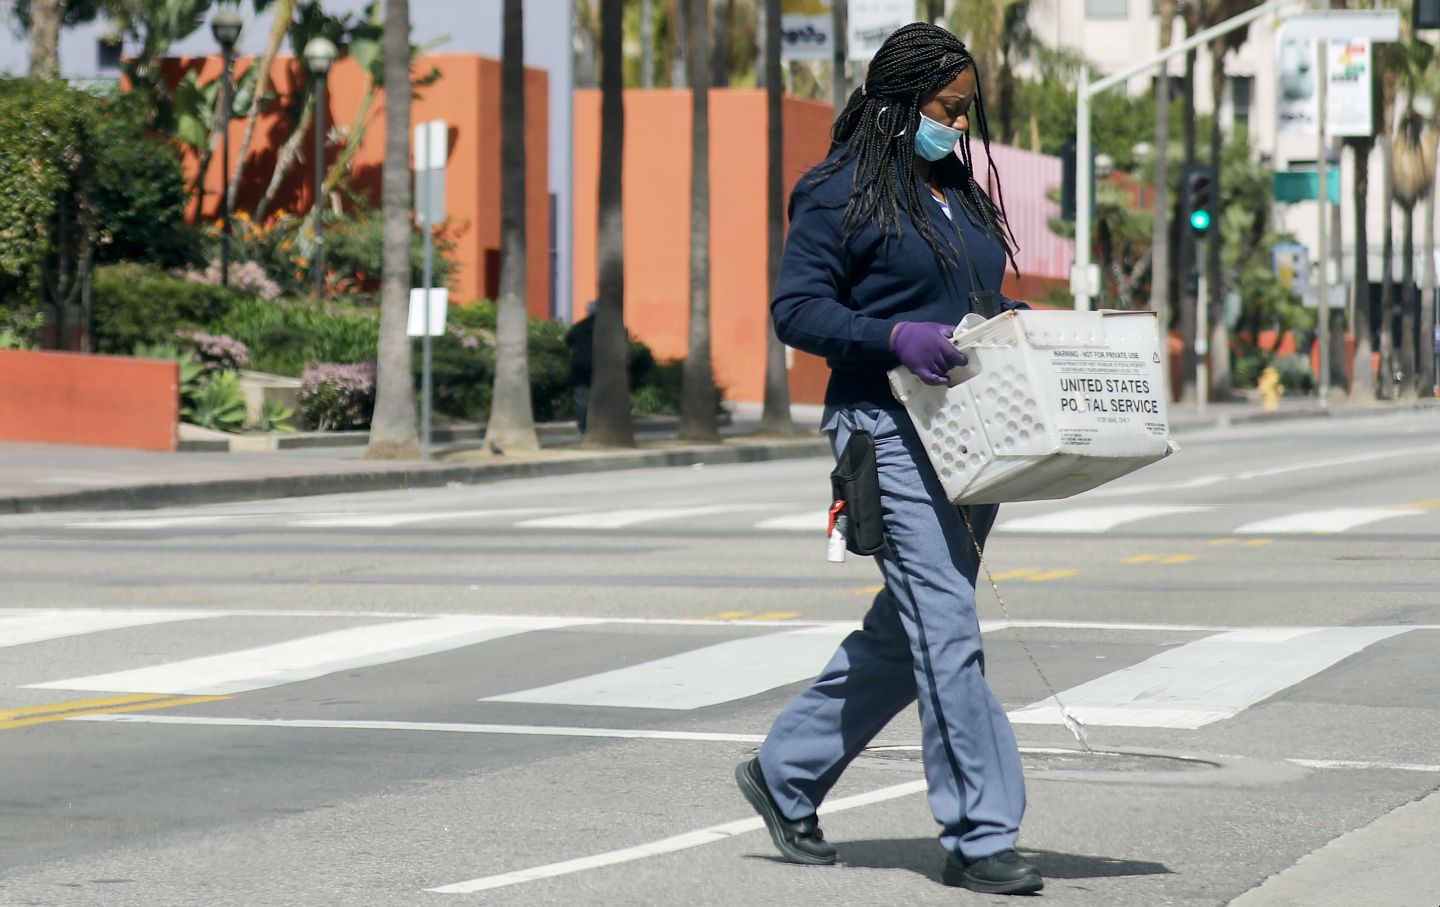 USPS worker with gloves and mask crosses street amid coronavirus outbreak in LA